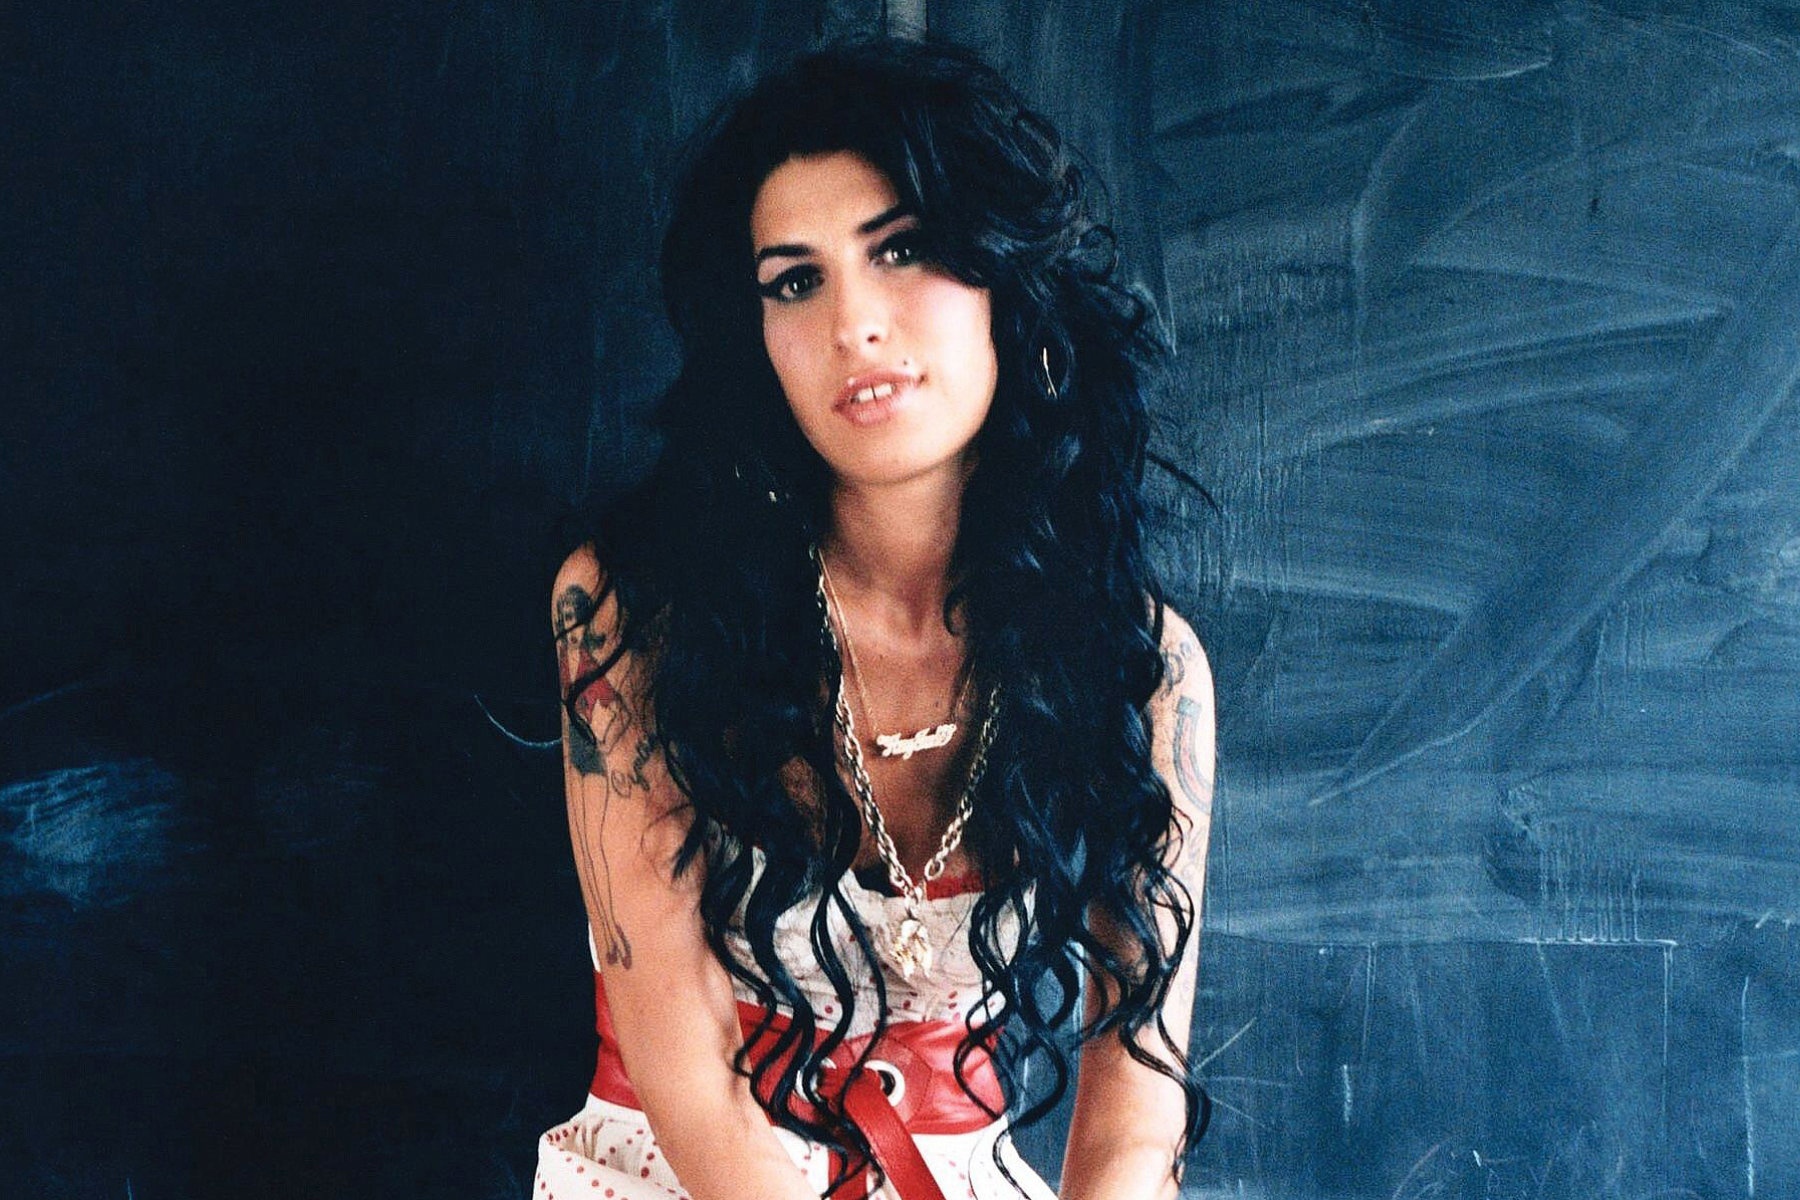 New Release; Amy Winehouse at the BBC Universal Music Ireland